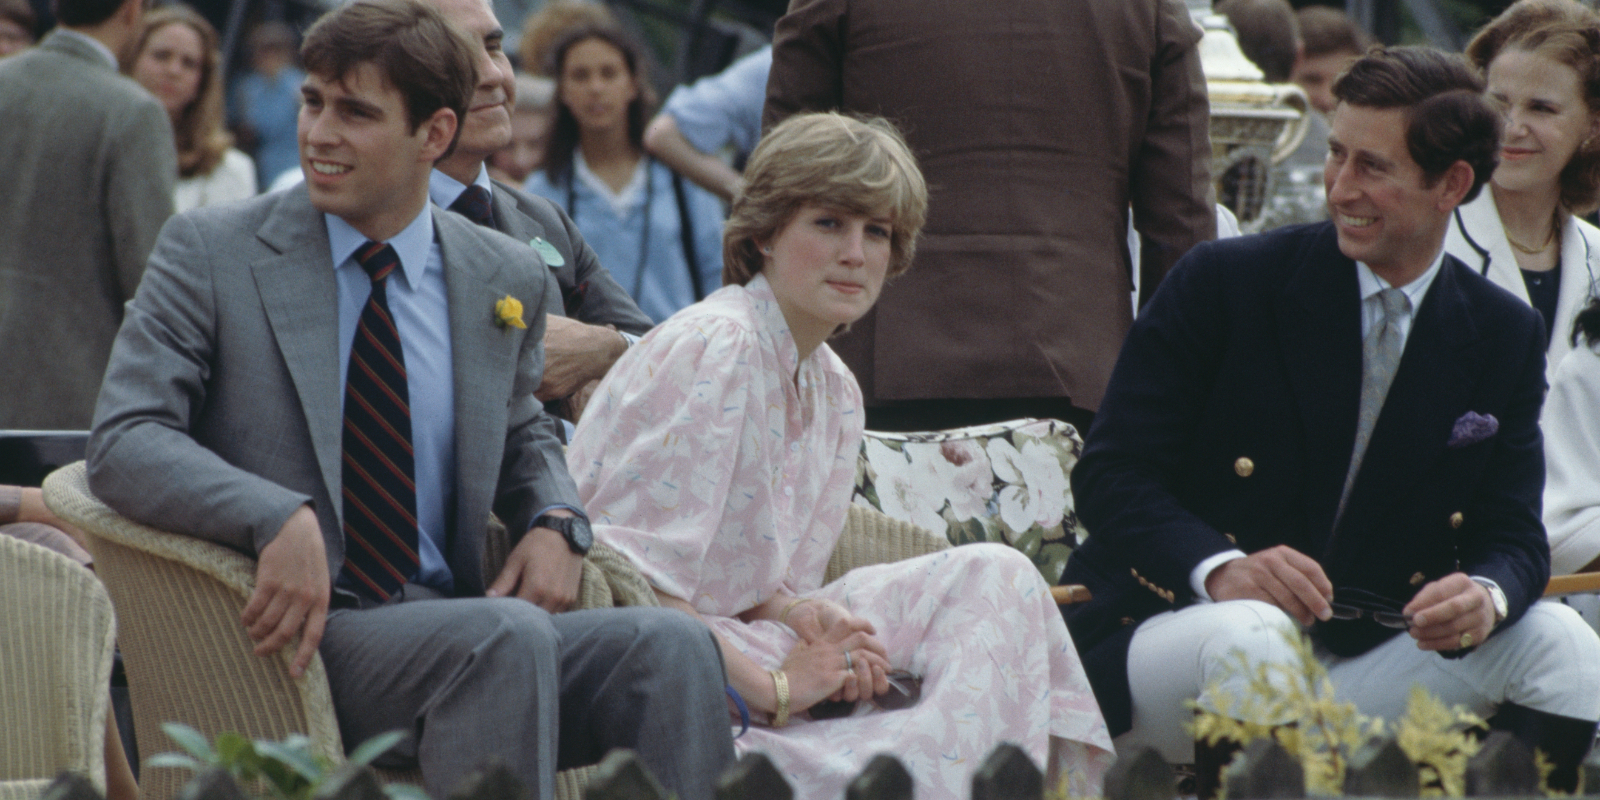 Prince Andrew, Princess Diana and Prince Charles attend the Cartier International polo match on Smith's Lawn, Windsor, three days before their July 1981 wedding.